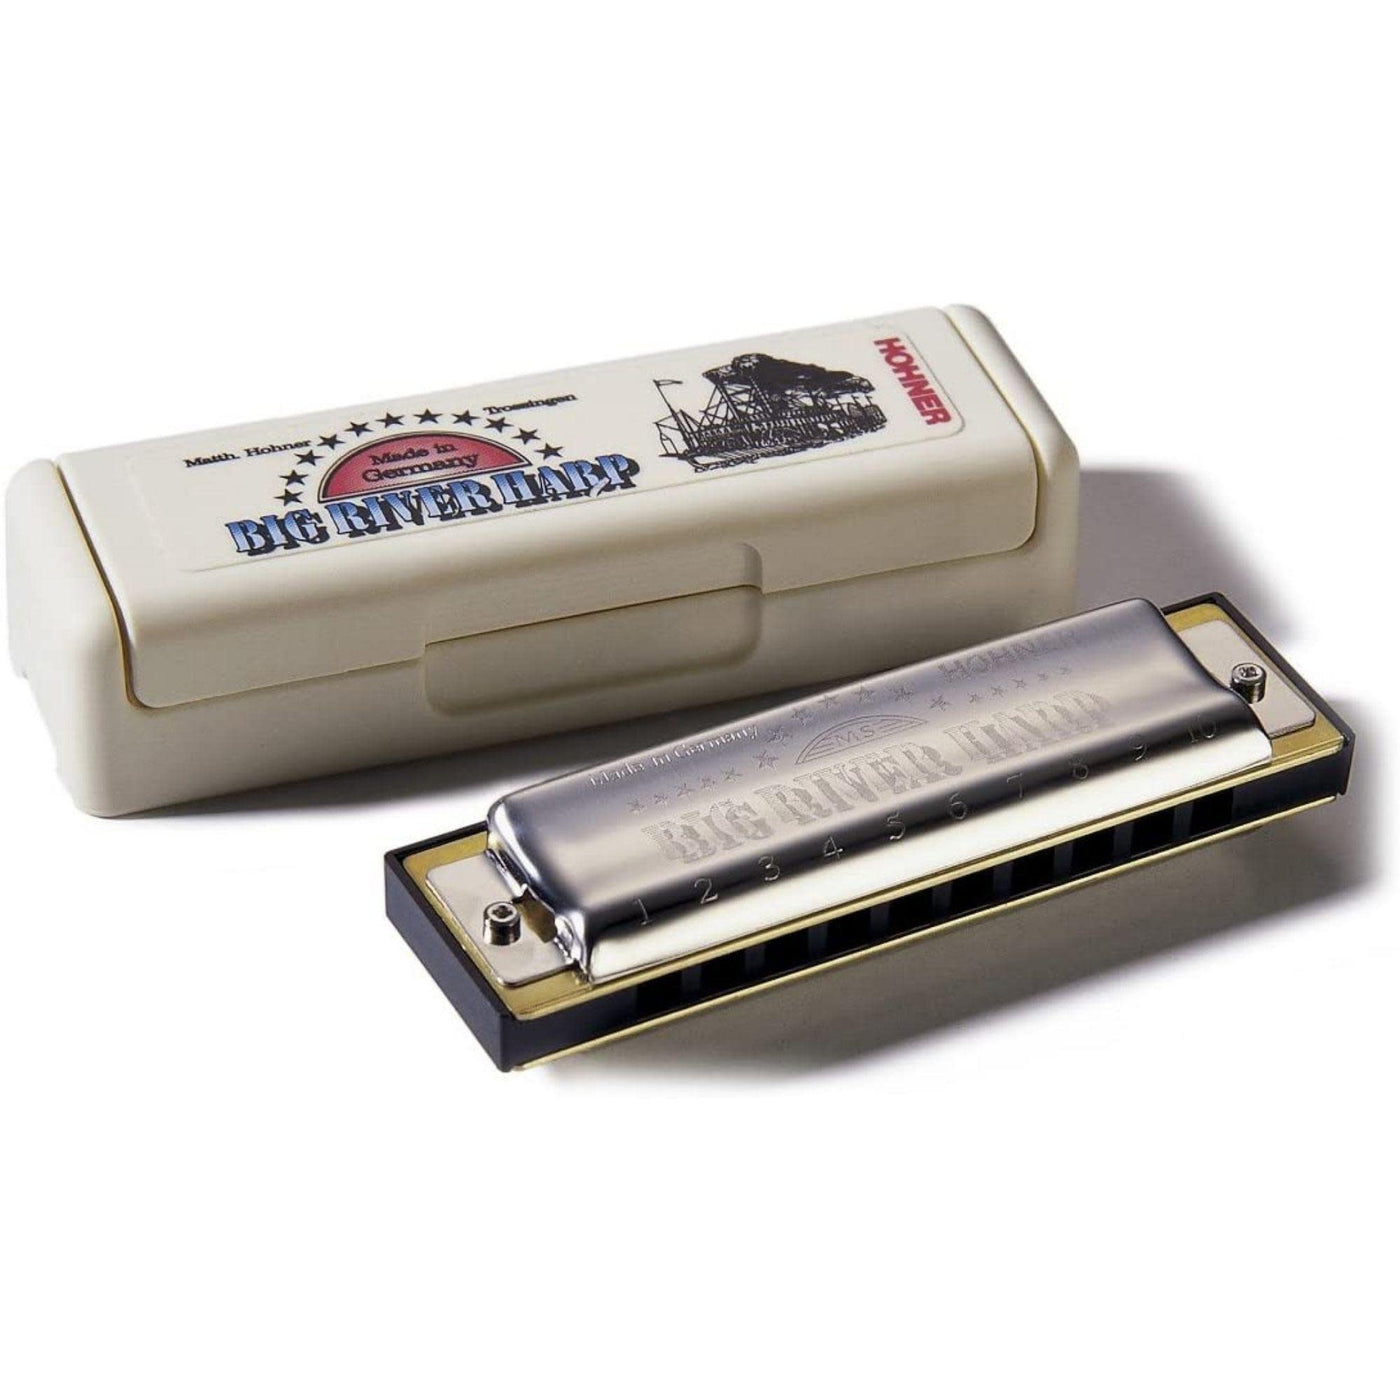 Hohner Big River Harmonica Boxed; Key of A (590BX-A)